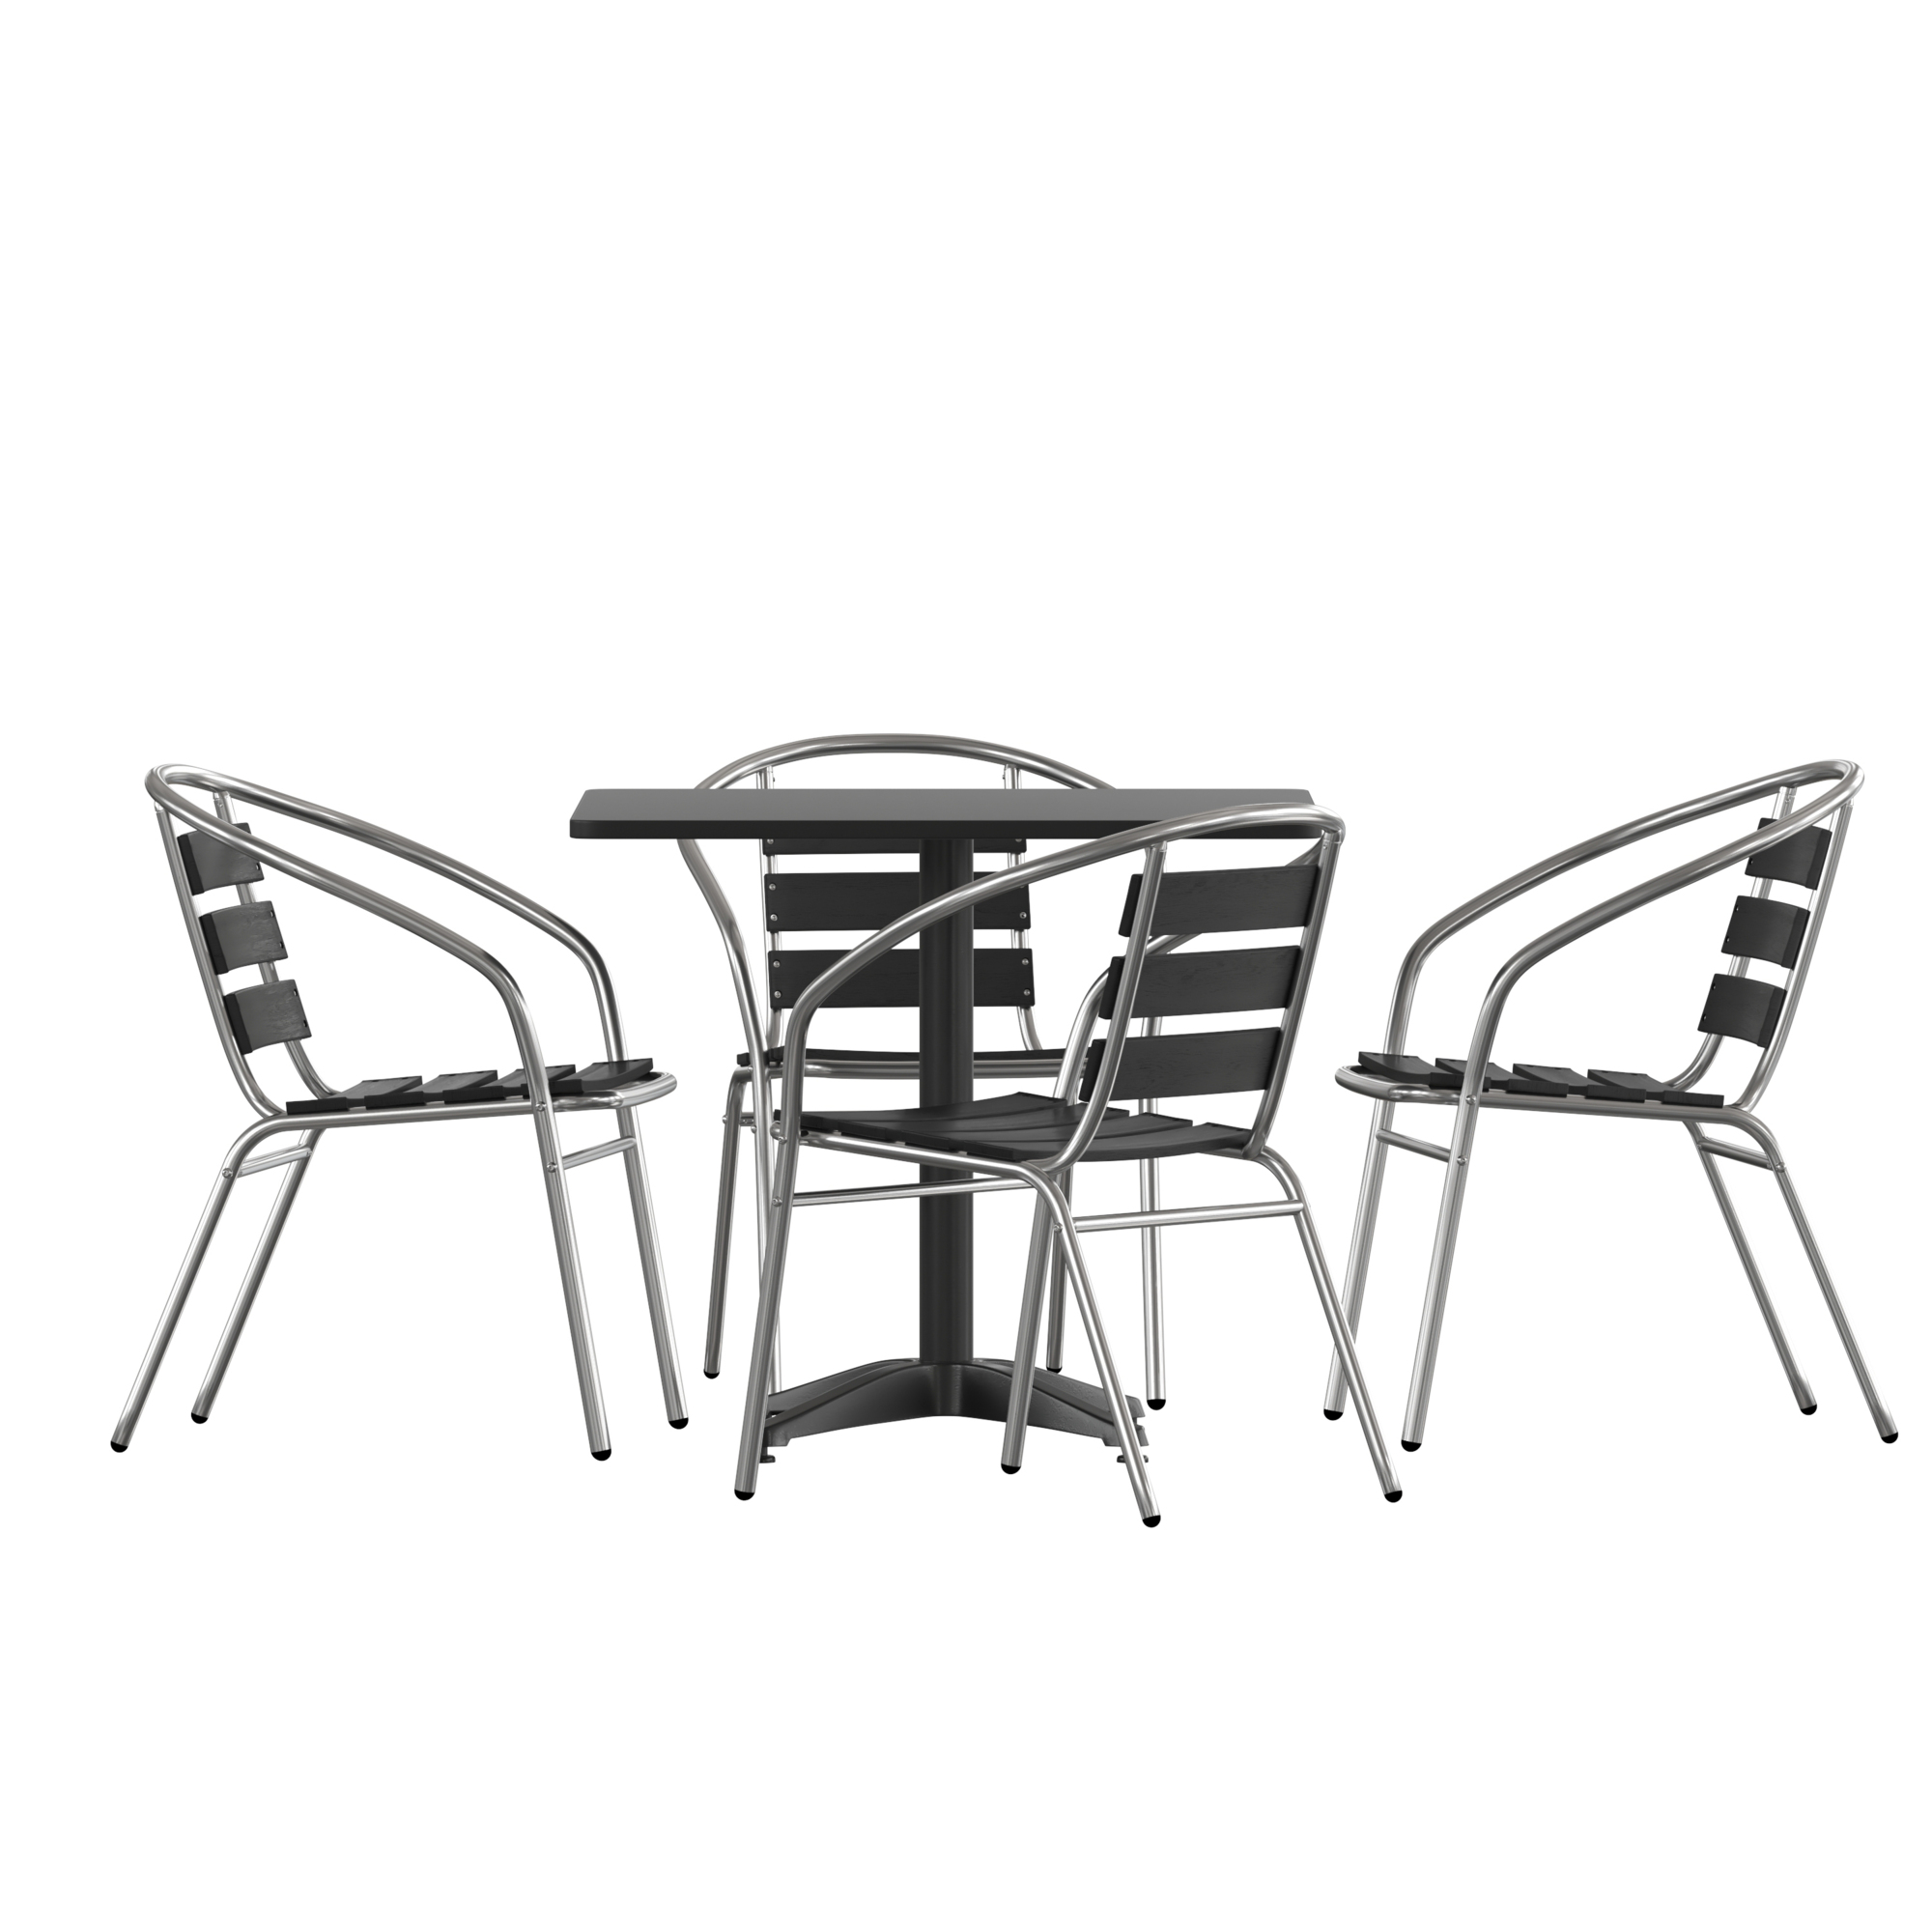 Flash Furniture, 31.5Inch SQ Glass Table - 4 Black Slat Back Chairs, Pieces (qty.) 5 Primary Color Black, Seating Capacity 4 Model THAL32SQ017BK4